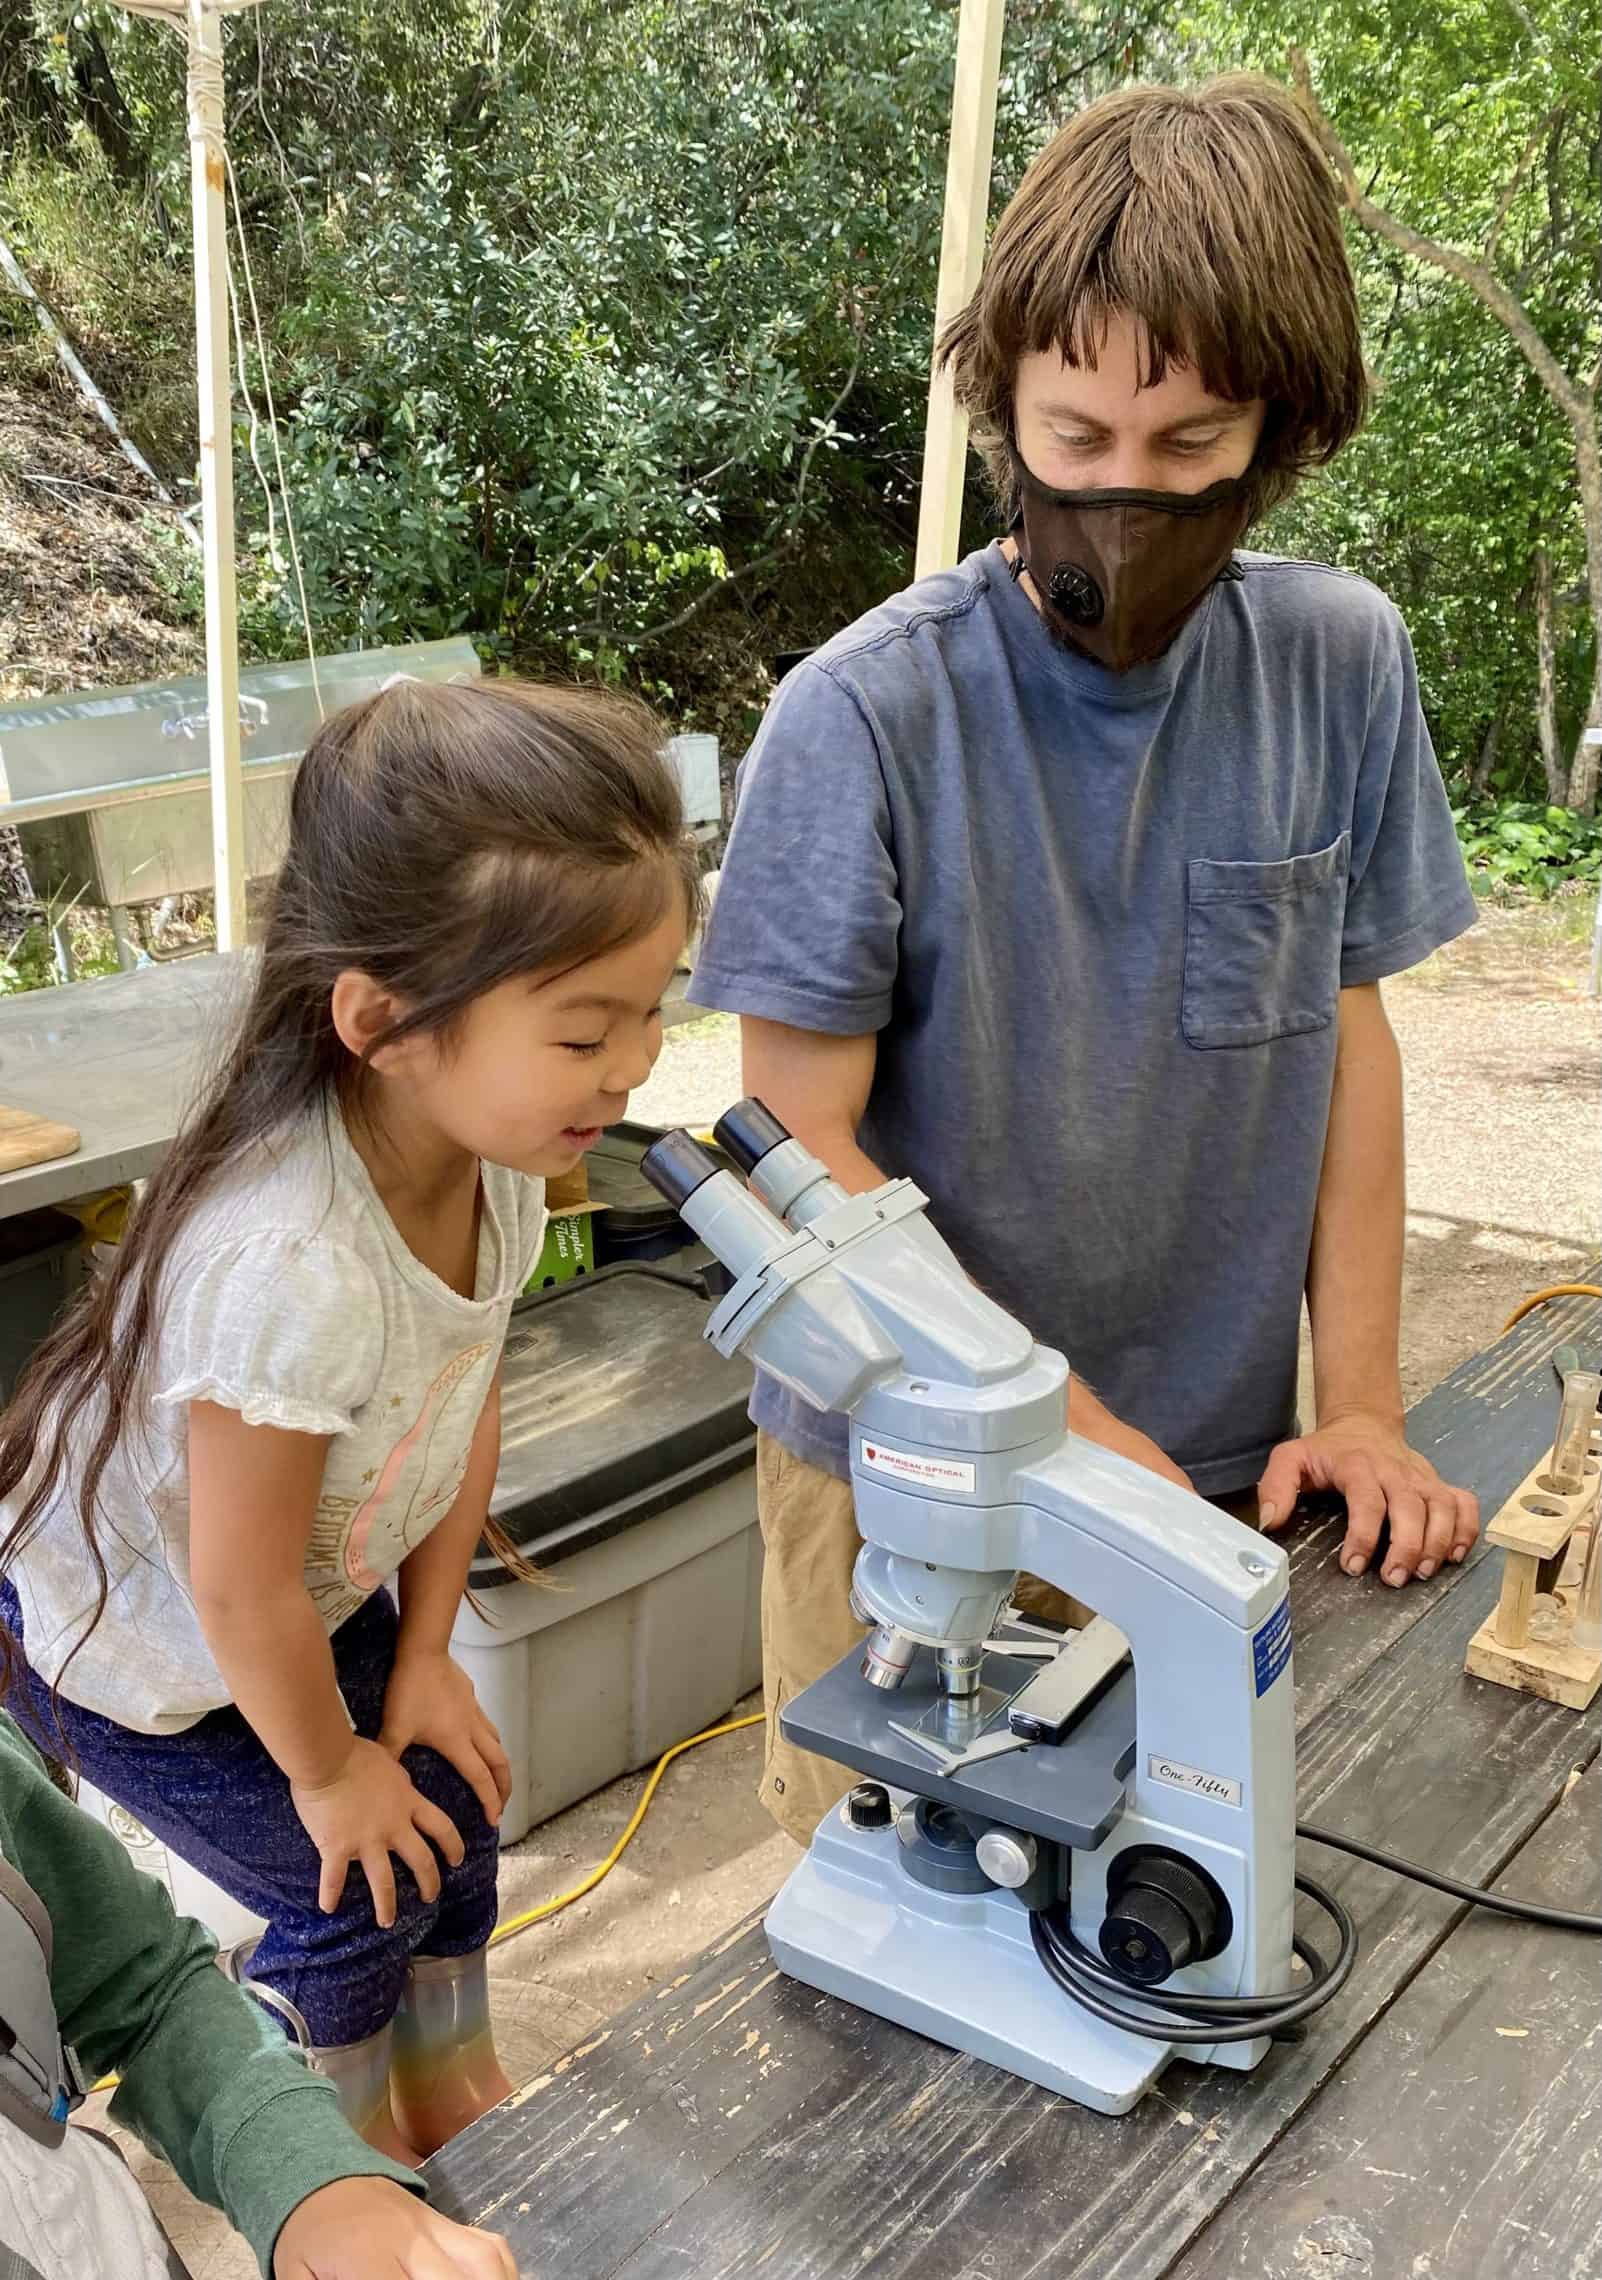 Earthroots Instructor Shane teaching a student about observing nature through a microscope